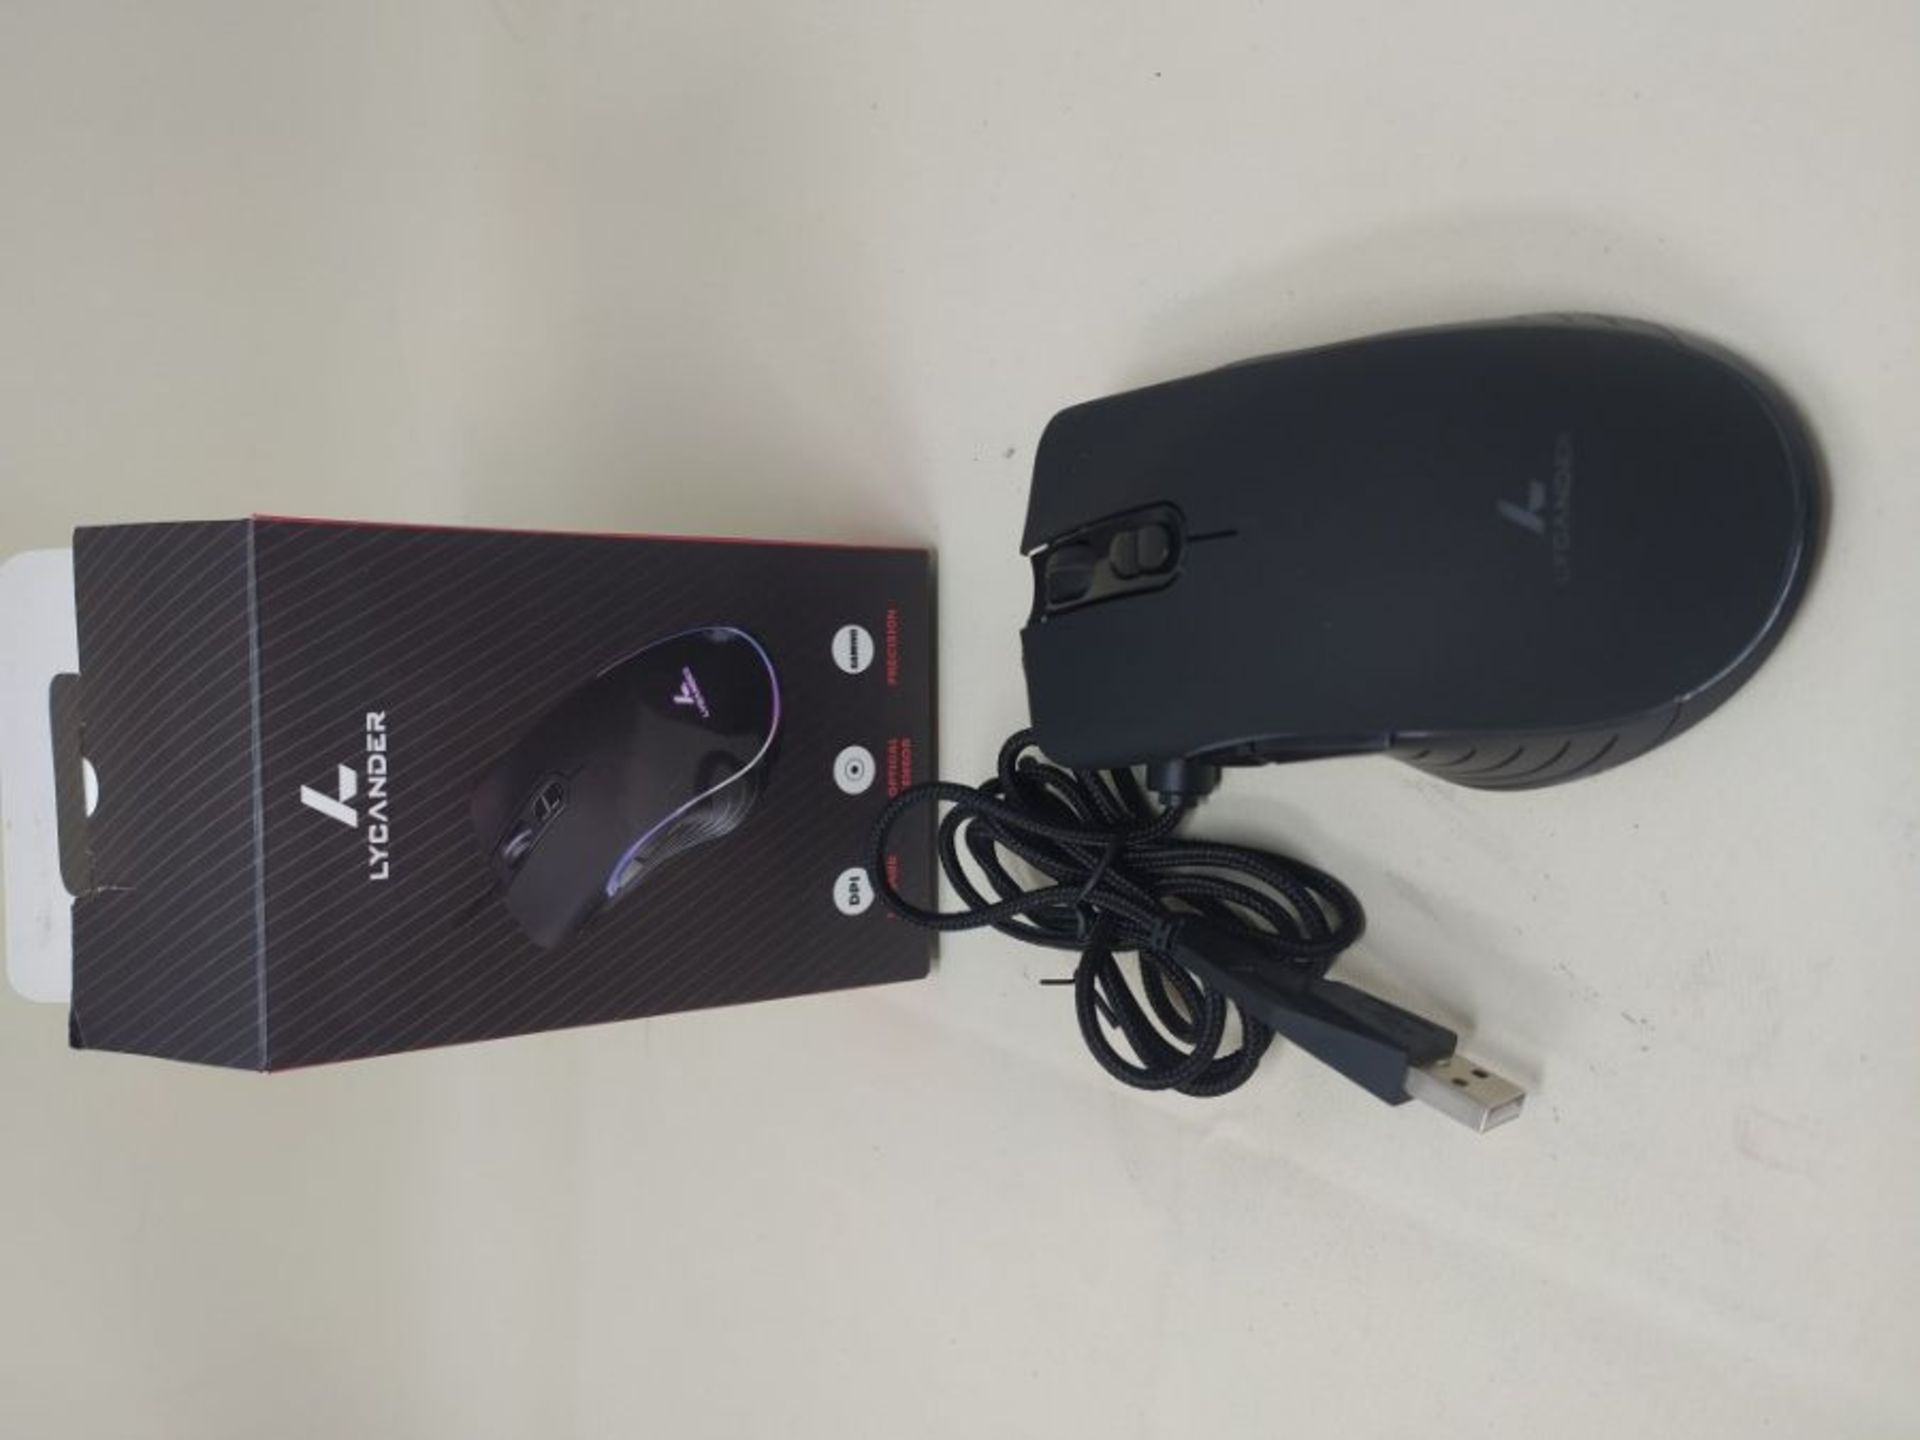 LYCANDER Gaming Mouse, Wired Optical USB Mice with Adjustable dpi up to 6400, 7 Button - Image 2 of 2